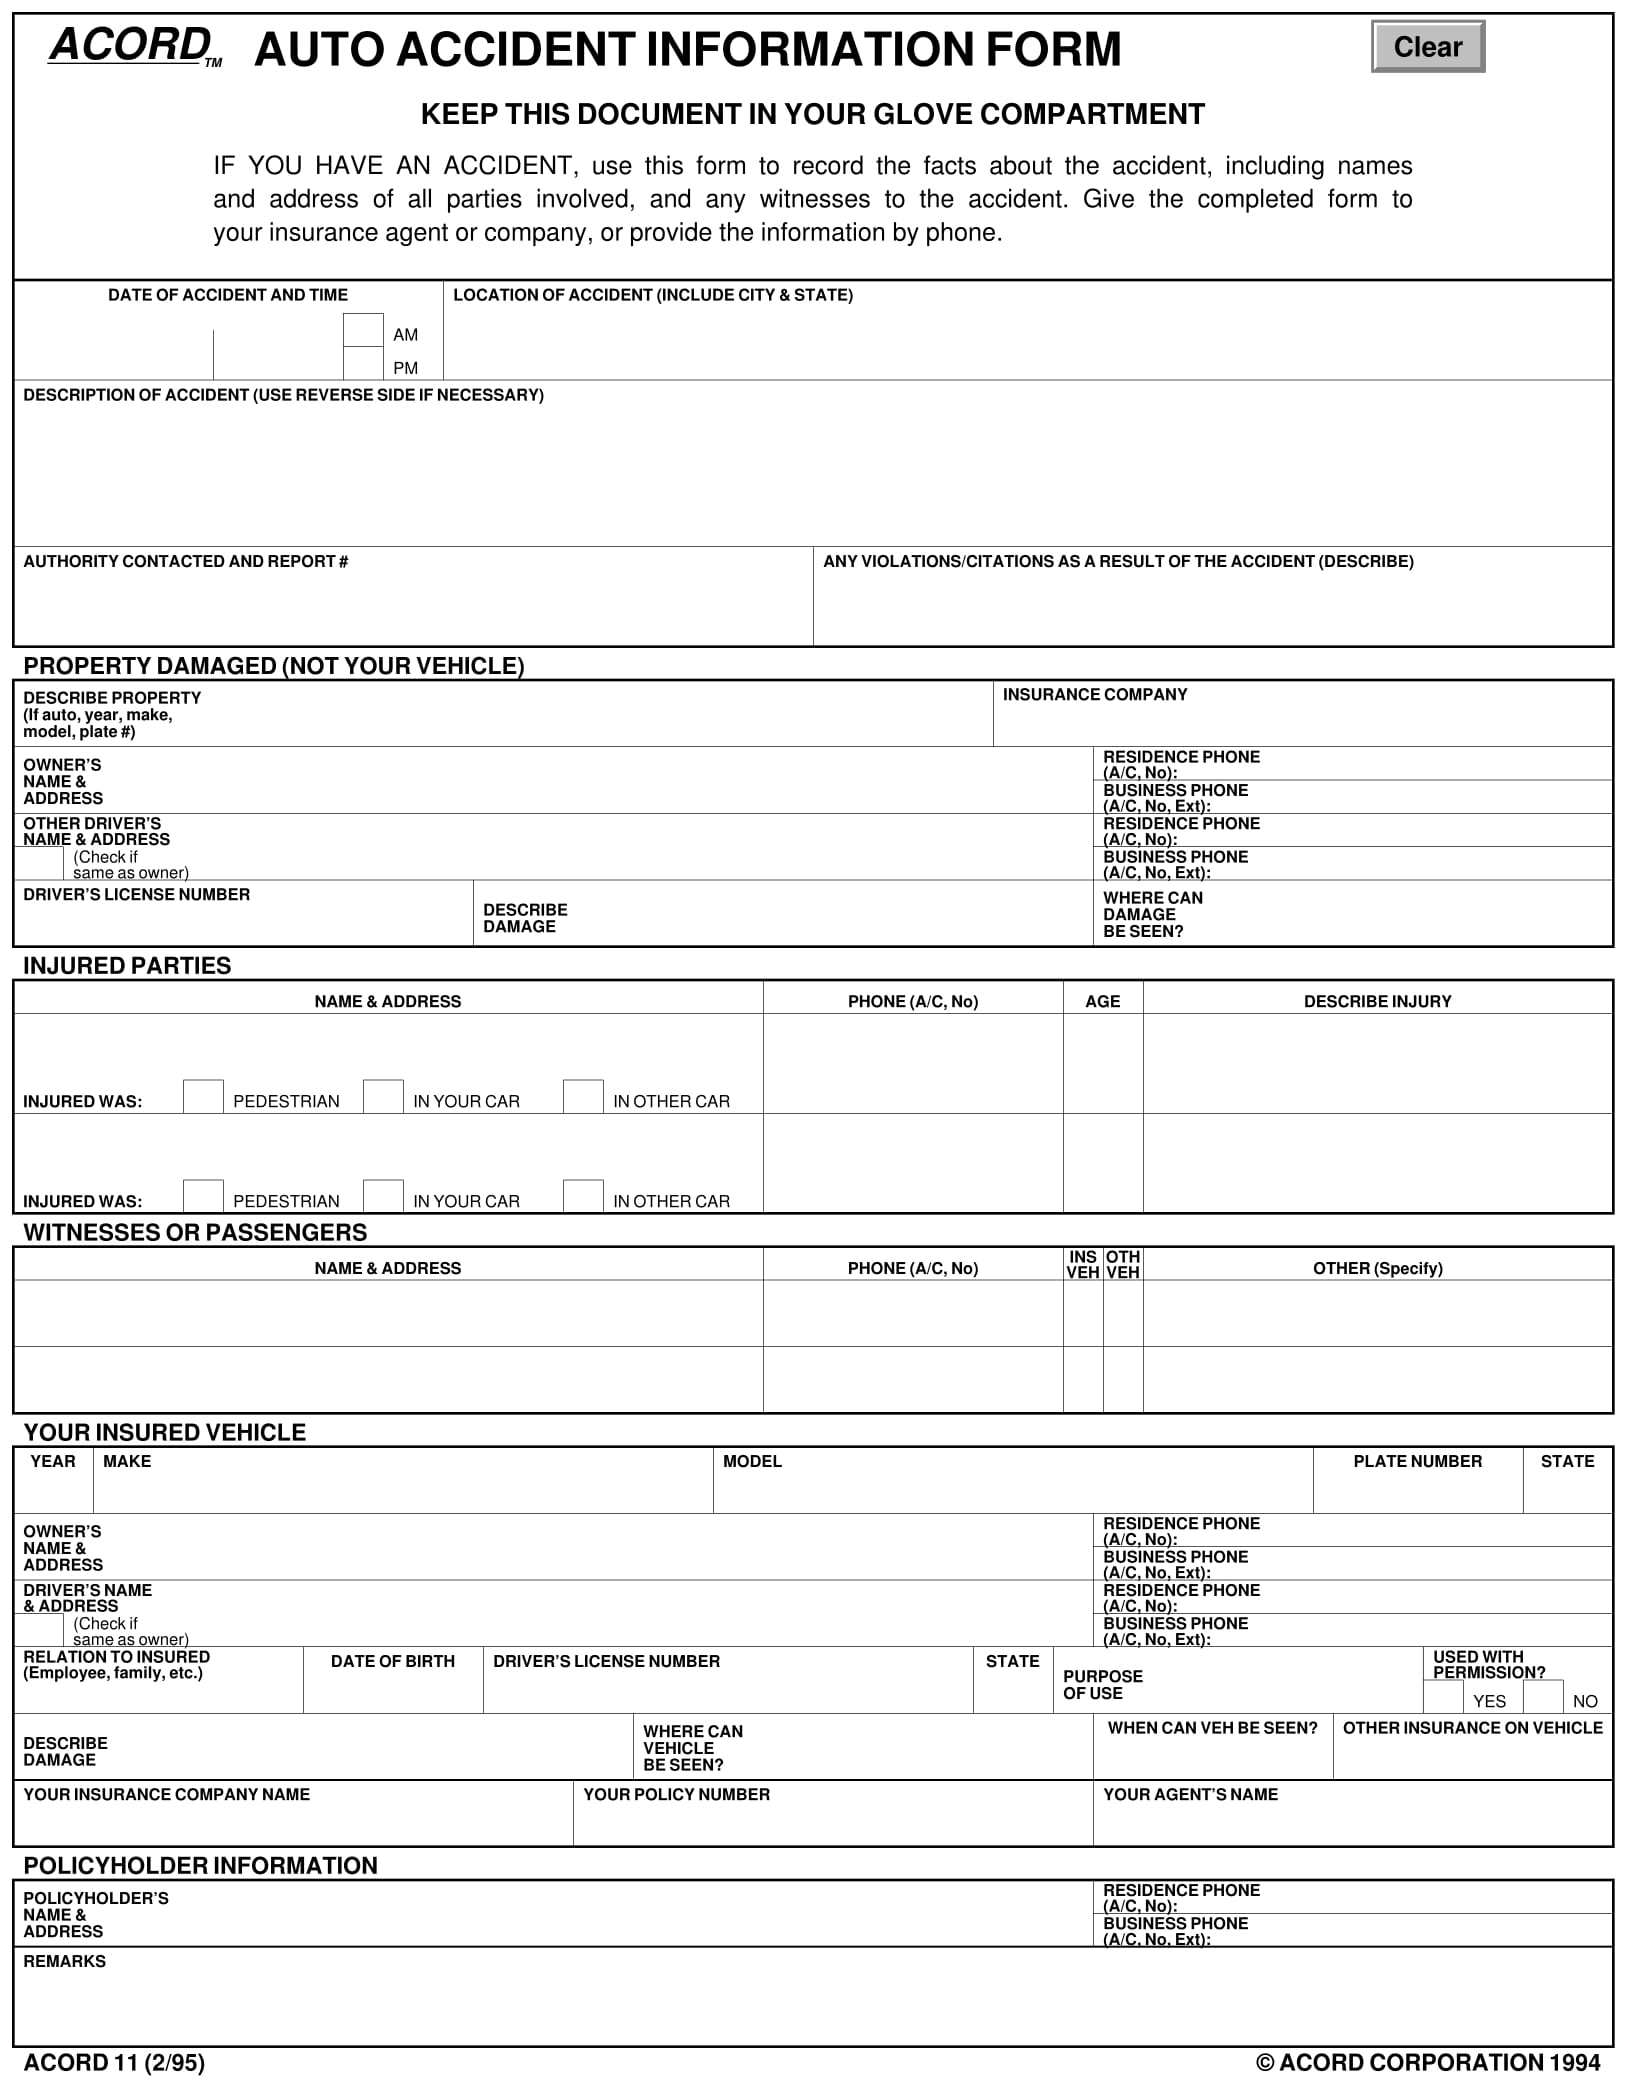 fillable auto accident information form 1